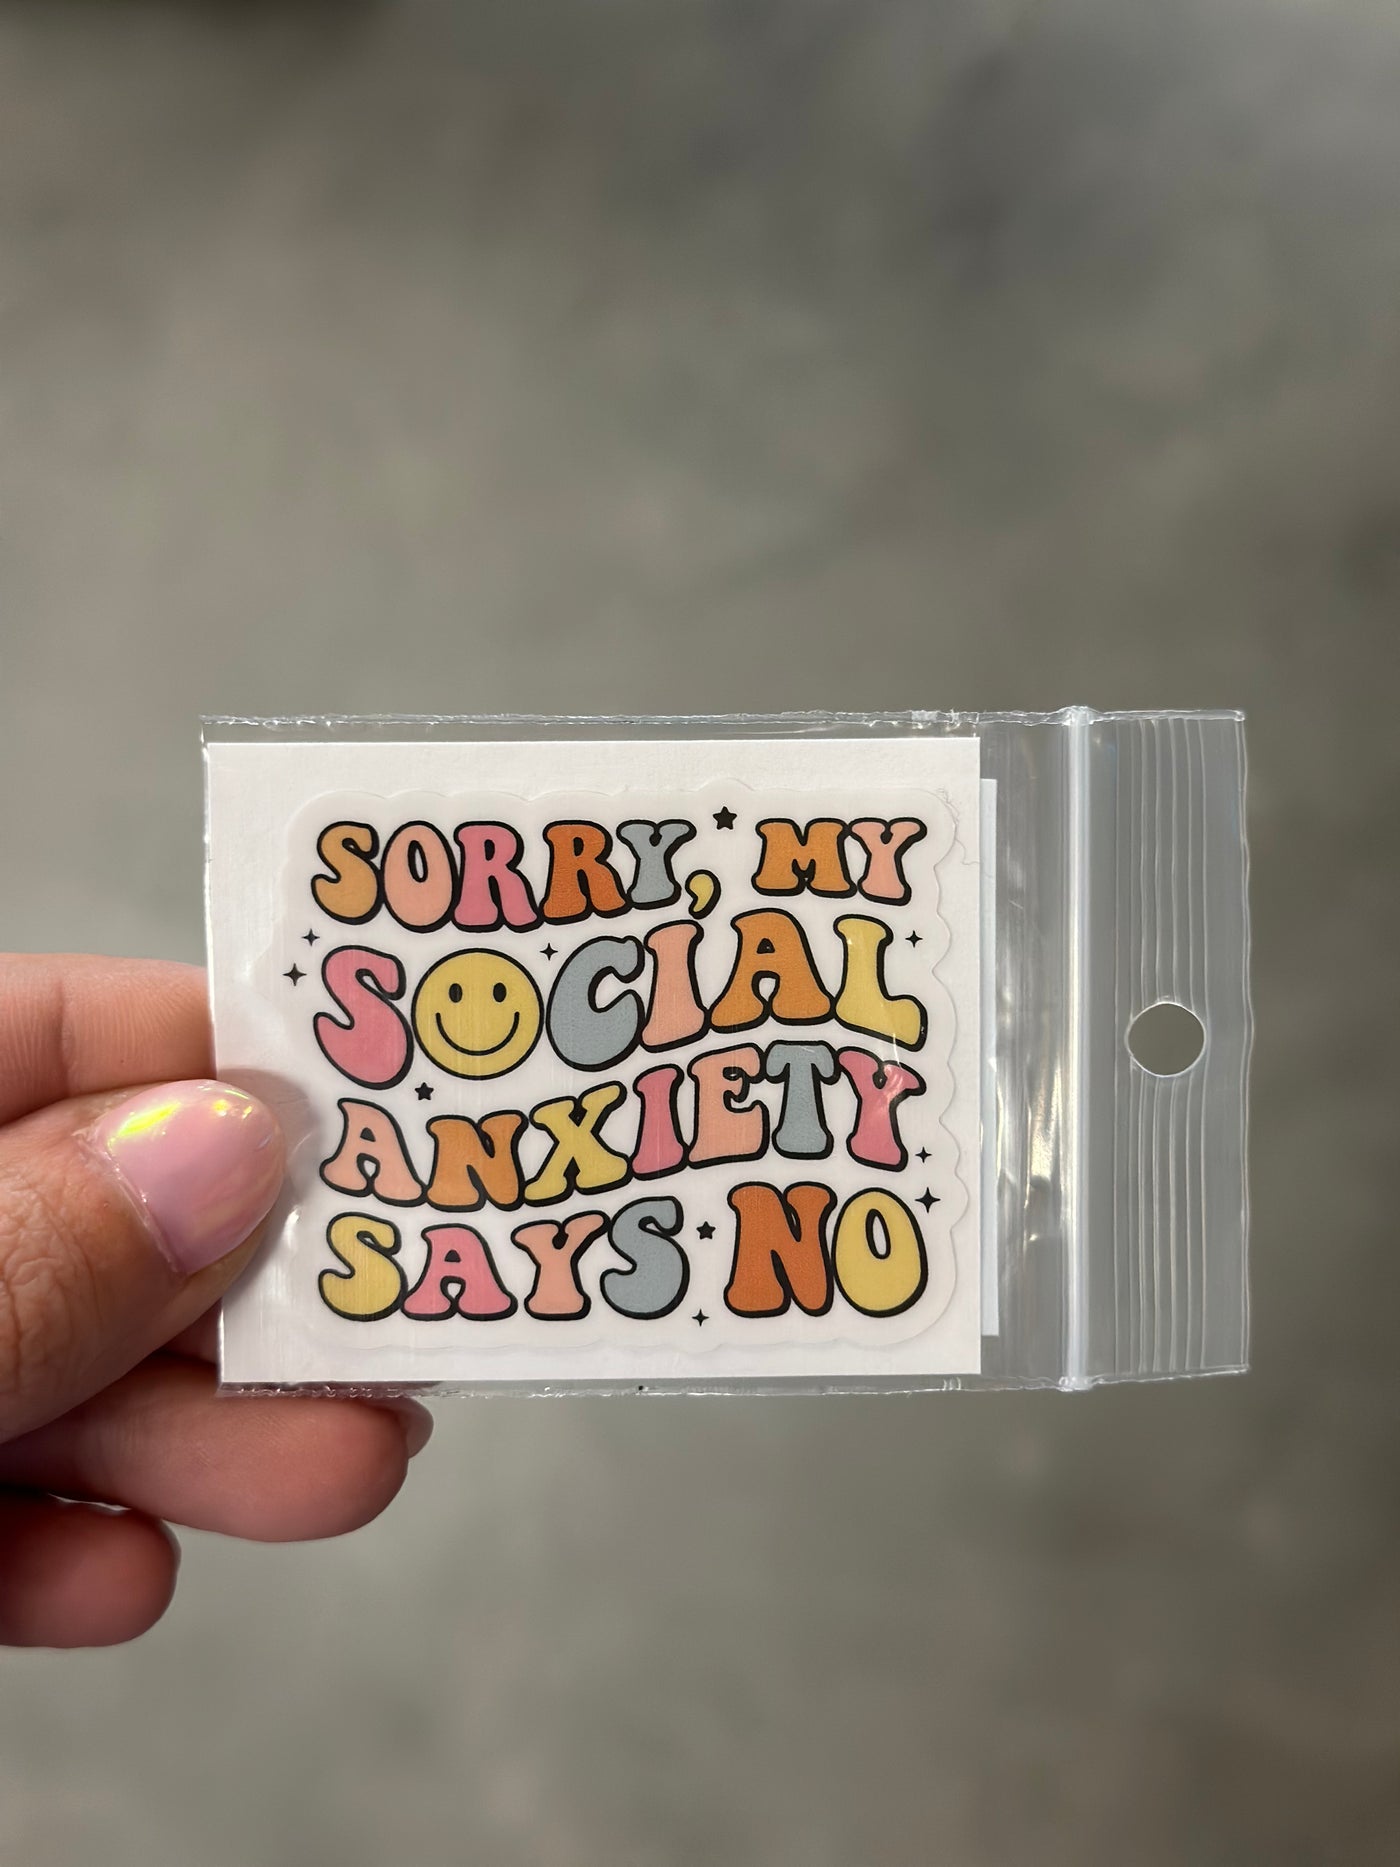 Sorry my Social Anxiety says no sticker